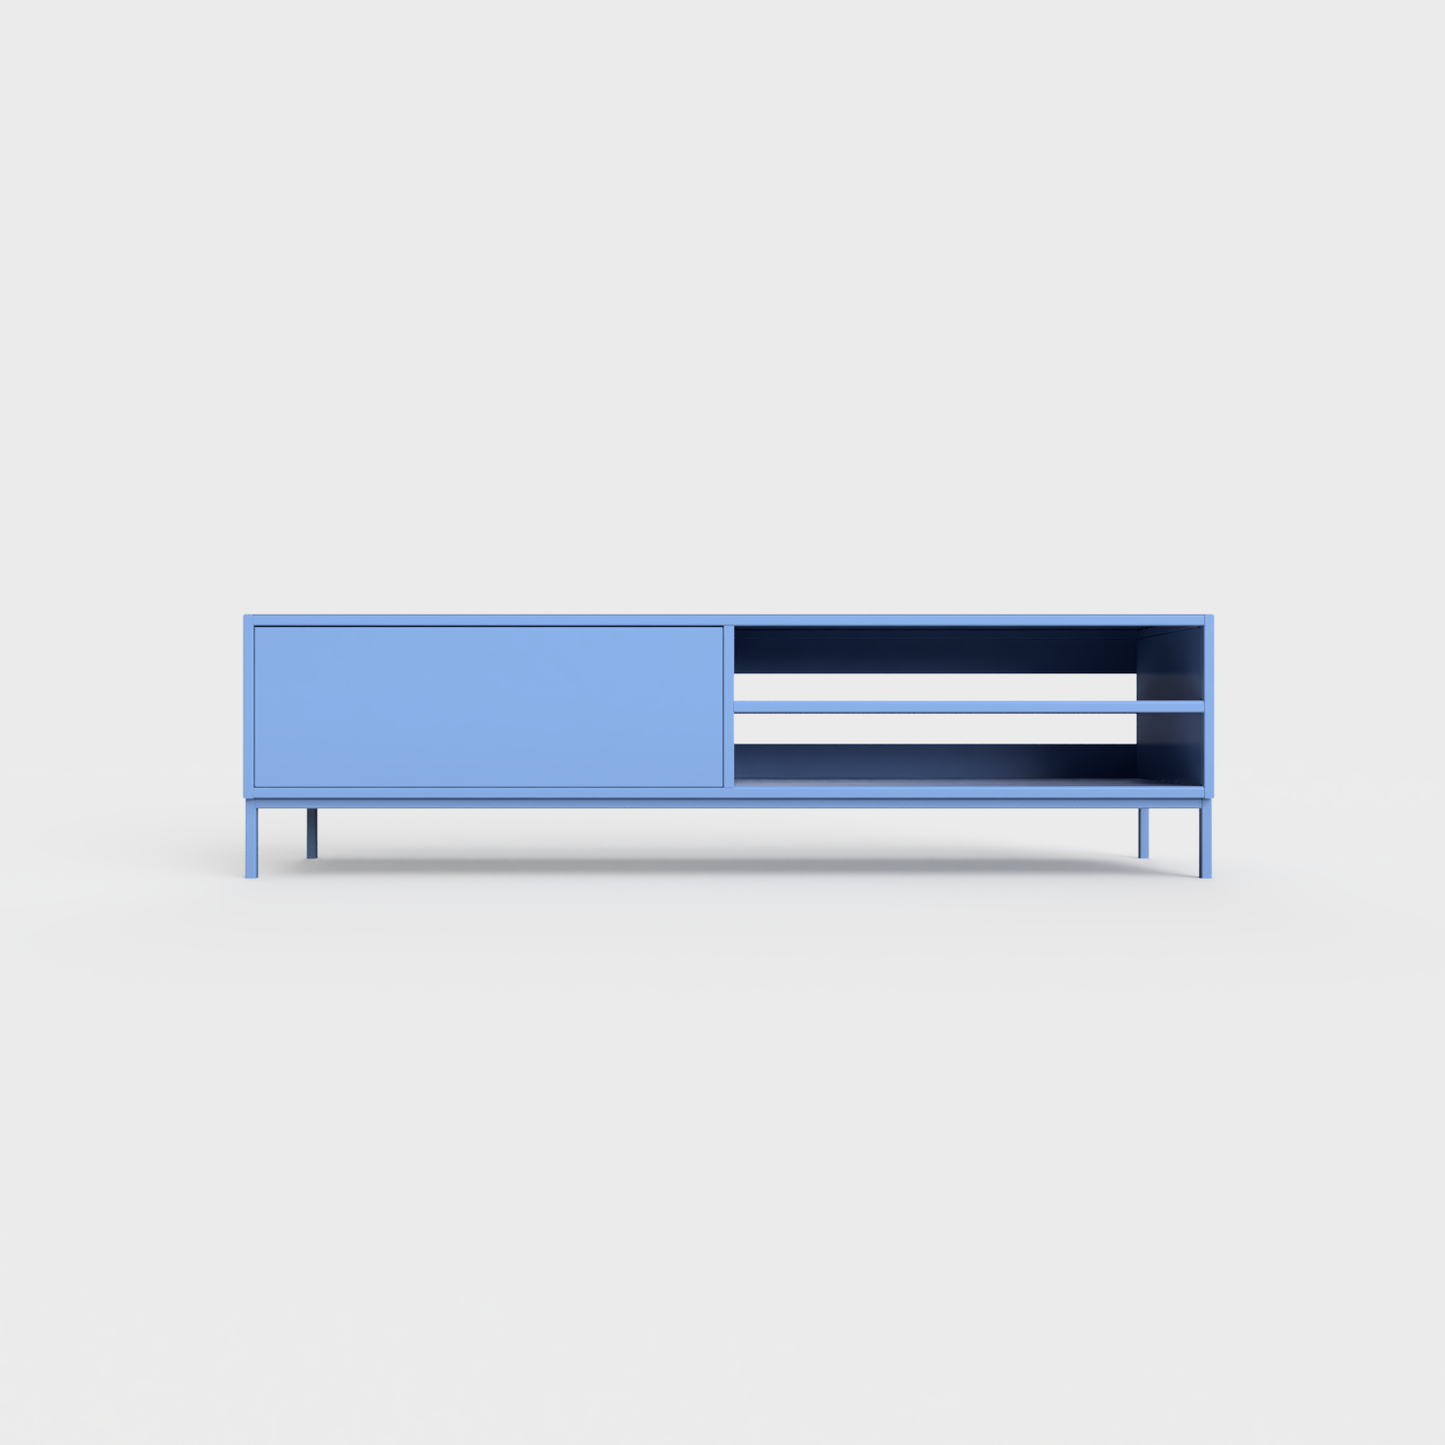 Prunus 02 Lowboard in Sky blue color, powder-coated steel, elegant and modern piece of furniture for your living room